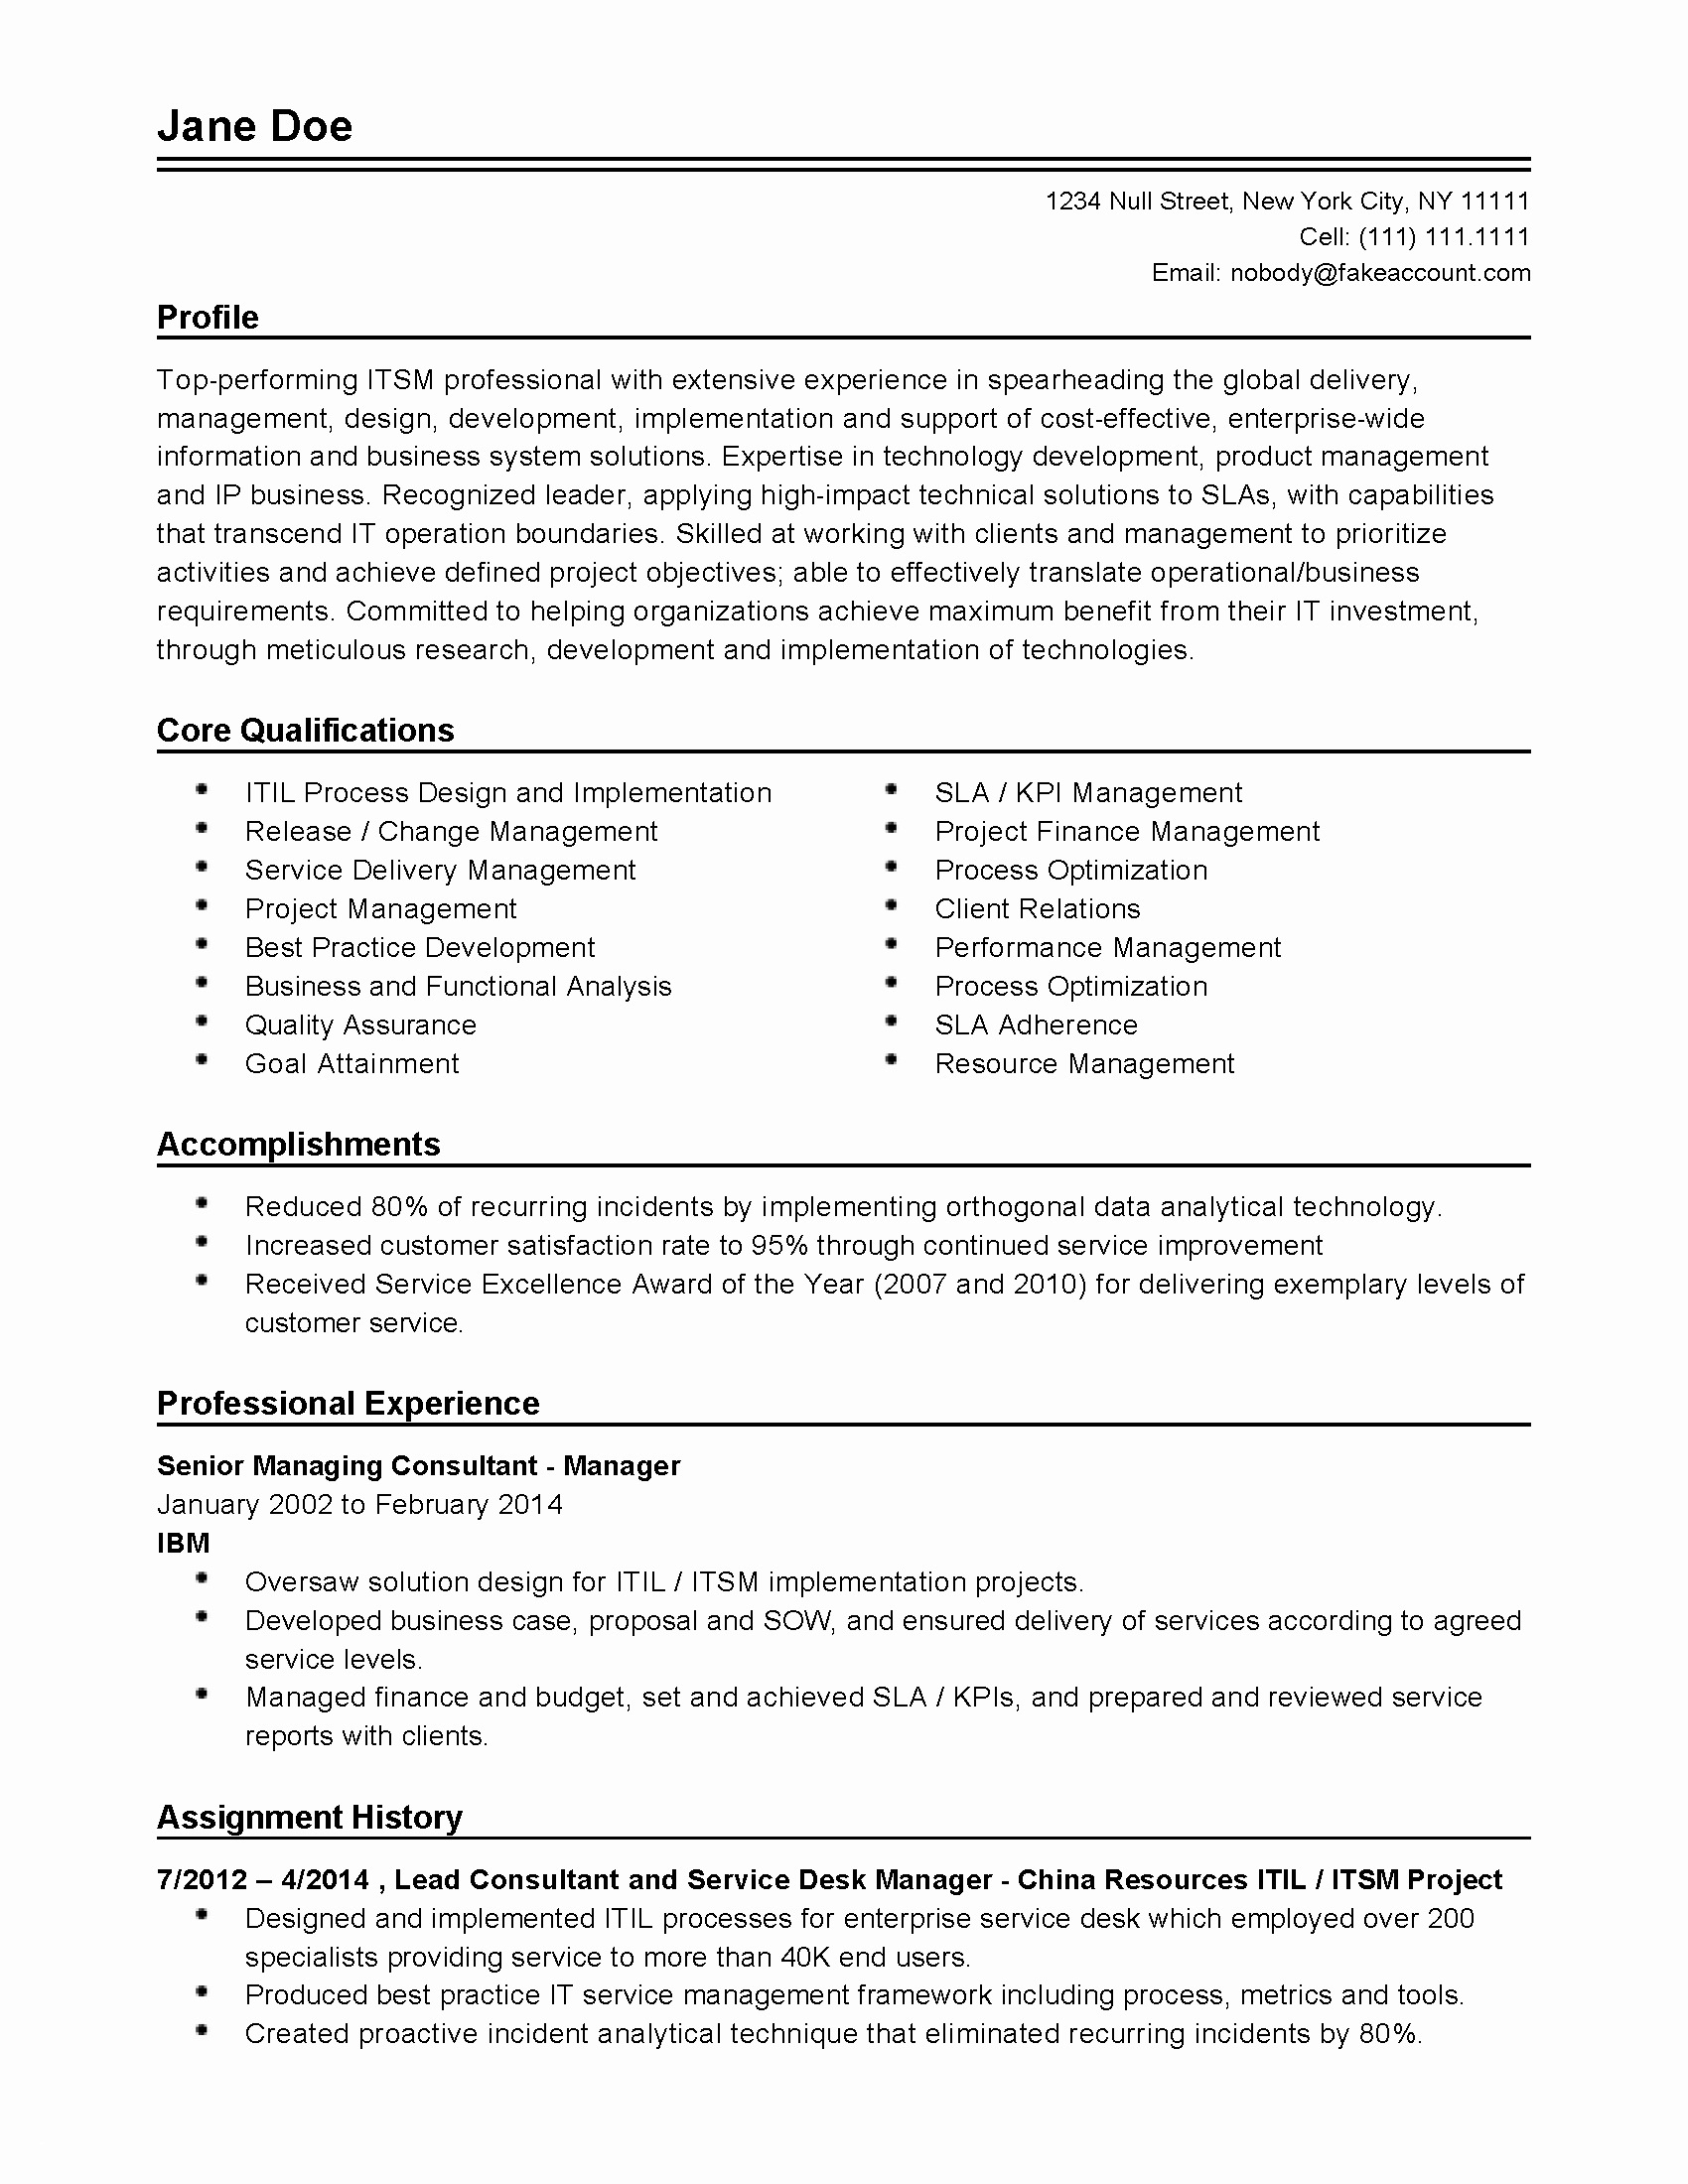 Job Letter Offer Template - Resume Writer Template Lovely Difference Between Cover Letter and